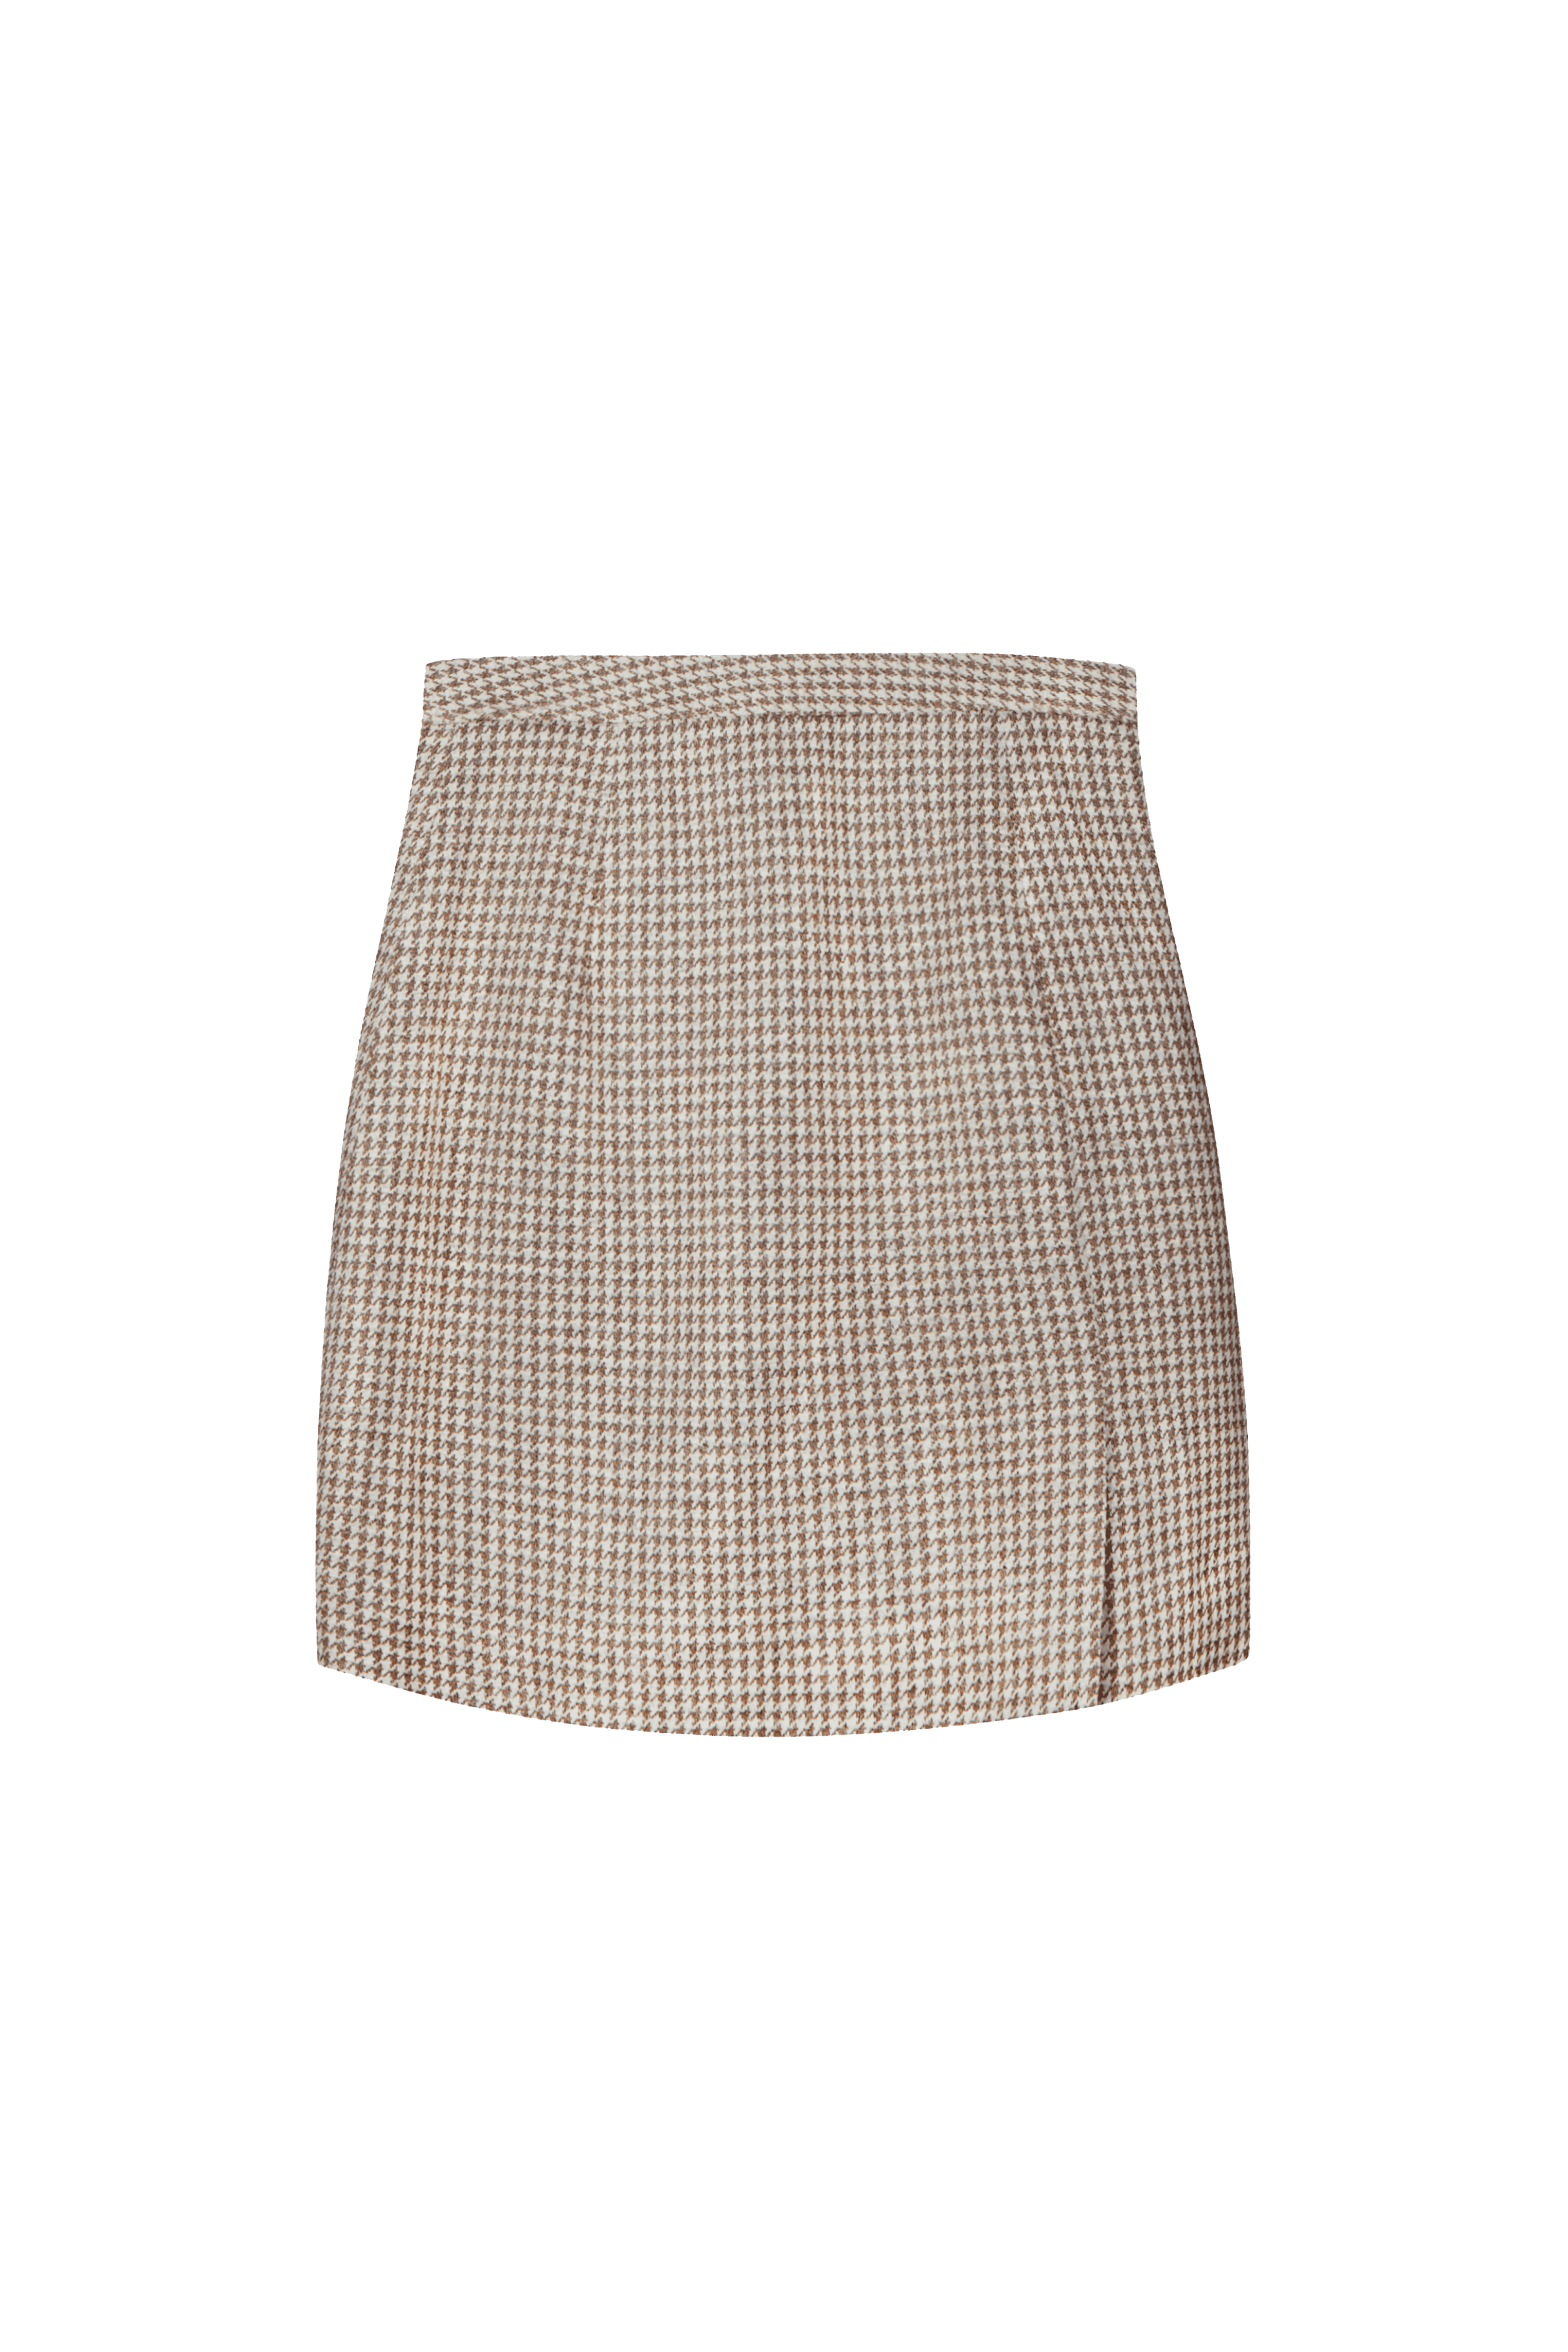 Ariston Tan & Ivory Houndstooth Skirt by Knot Standard